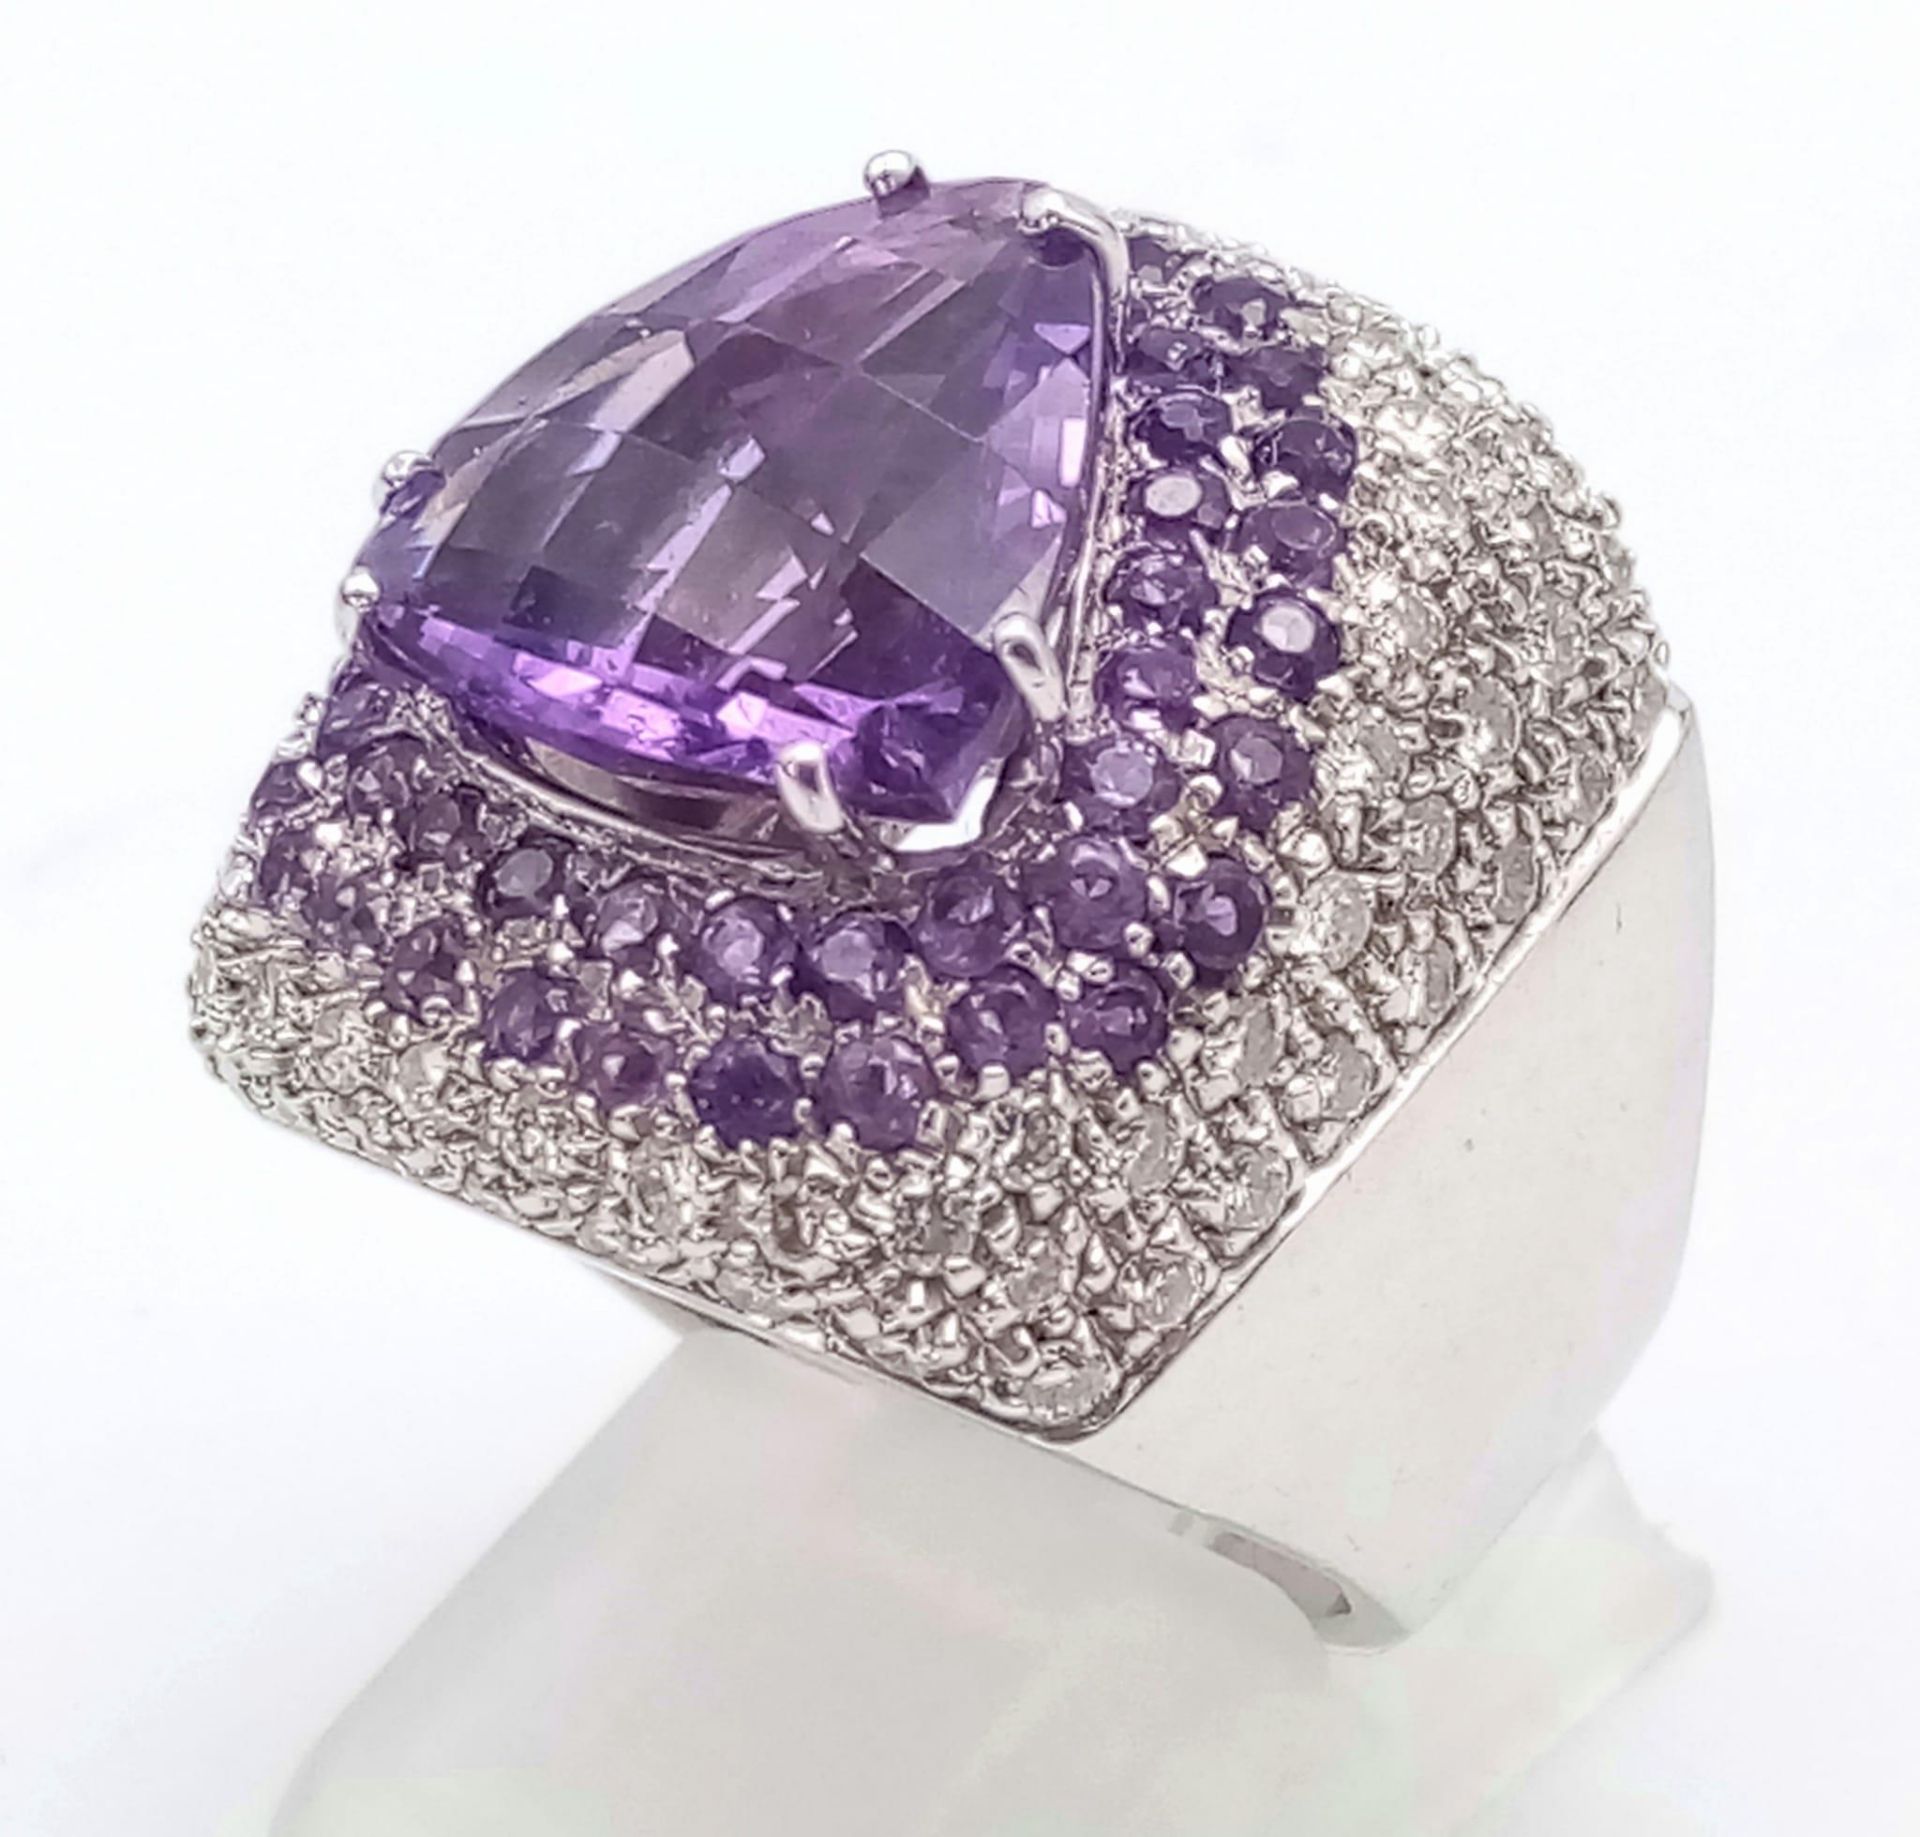 A FABULOUS 18K WHITE GOLD DIAMOND AND AMETHYST RING WITH MATCHING EARRINGS . 35.5gms - Image 5 of 12